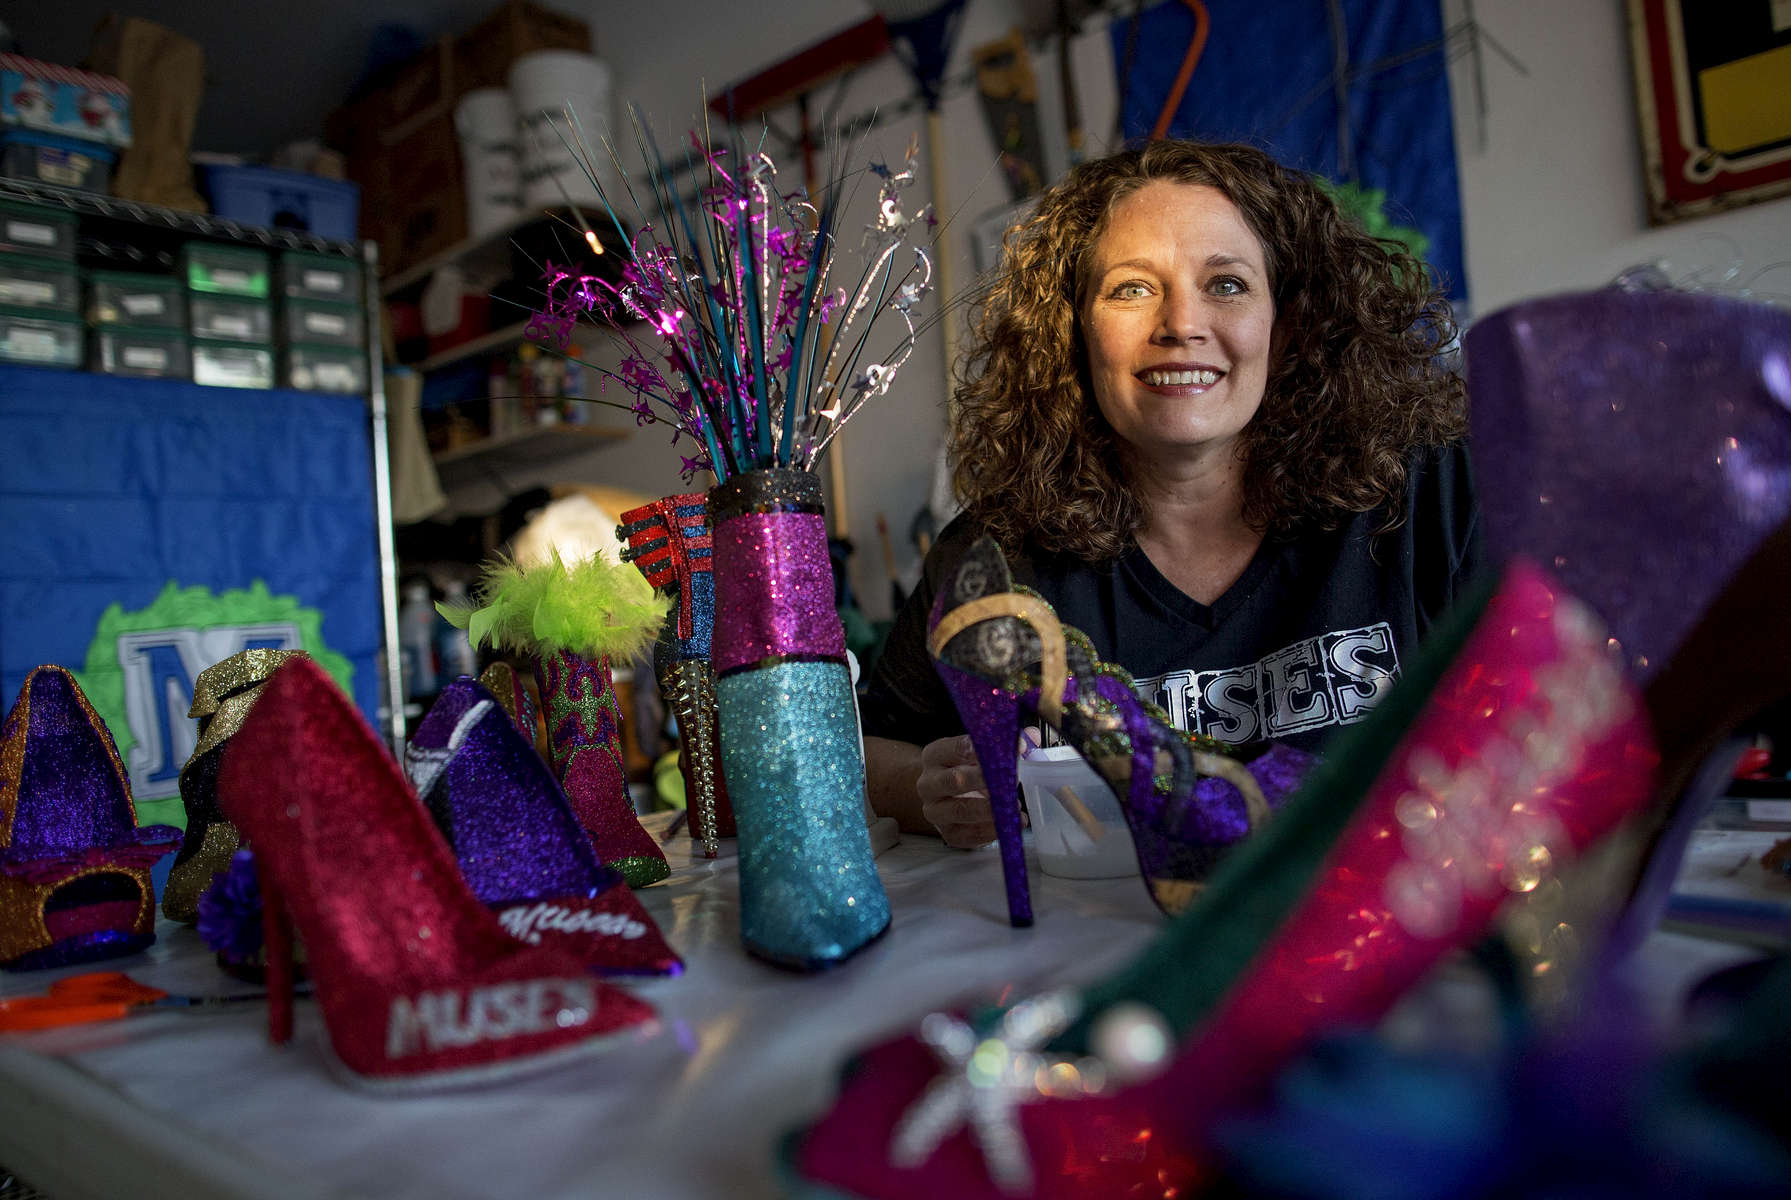 KENNER, LOUISIANA. Cari Rhoton, a lieutenant in an all-female Mardi Gras parade group known as the Krewe of Muses, creates the group's signature shoes from her garage in Kenner, La., Sunday, Jan. 10, 2016. Over 1000 members of the organization ride floats and pass out hand decorated shoes and other trinkets during Mardi Gras. (AP Photo/Max Becherer) 